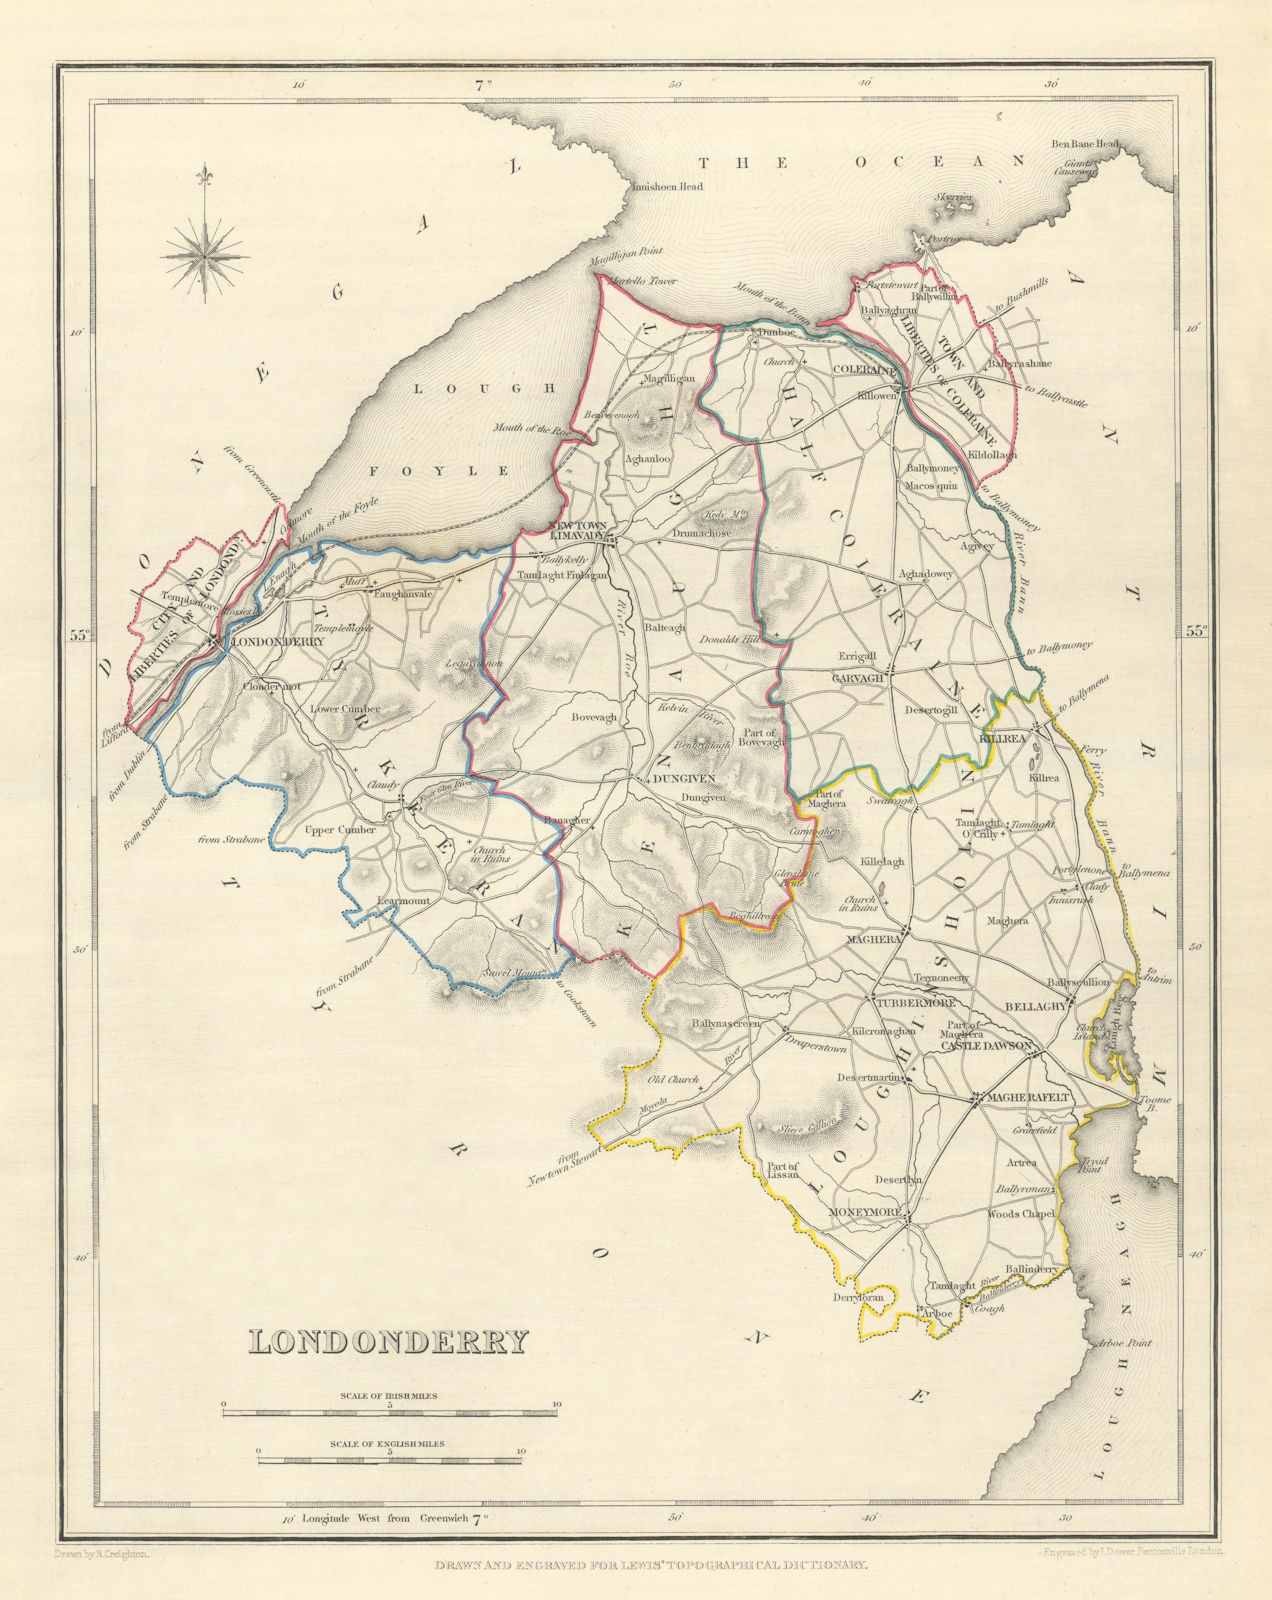 COUNTY LONDONDERRY antique map for LEWIS by CREIGHTON & DOWER. Ulster 1850